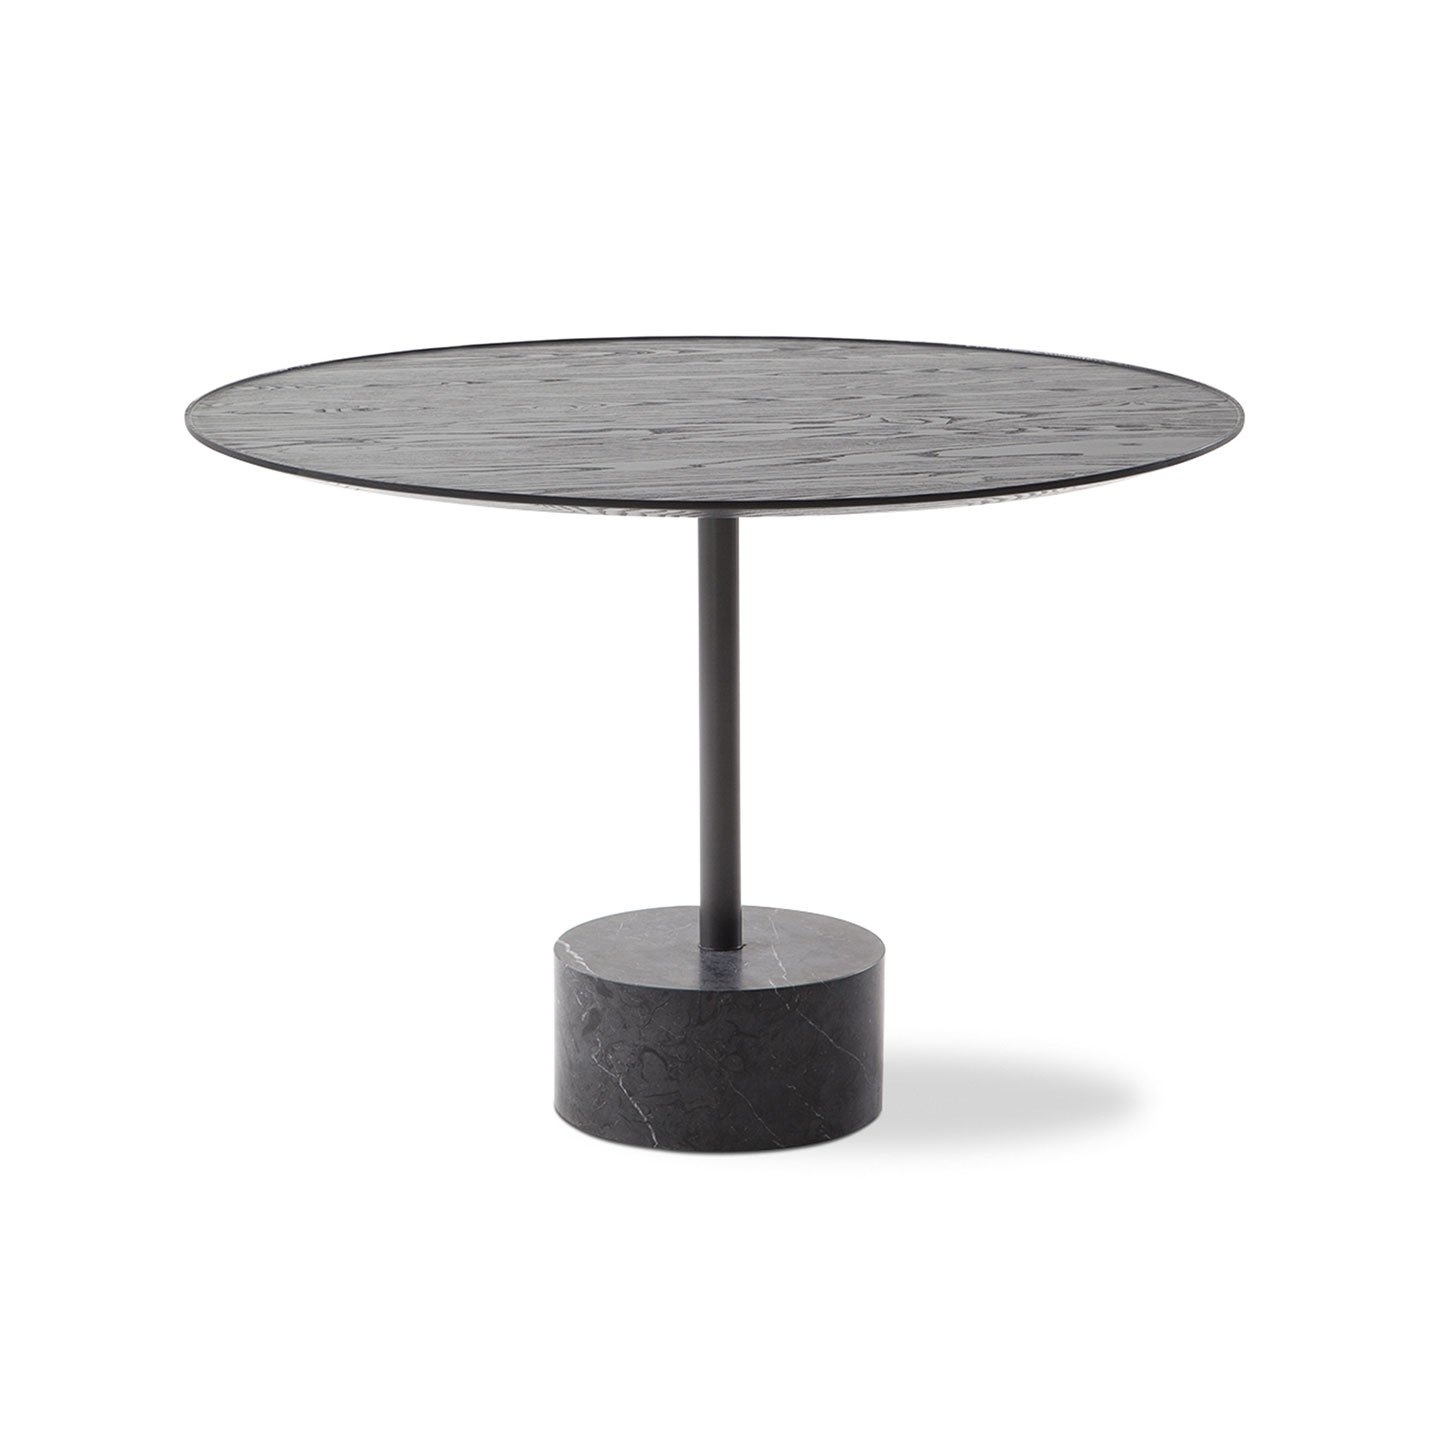 Haworth 9 table with circular base and circular top in black stained ash